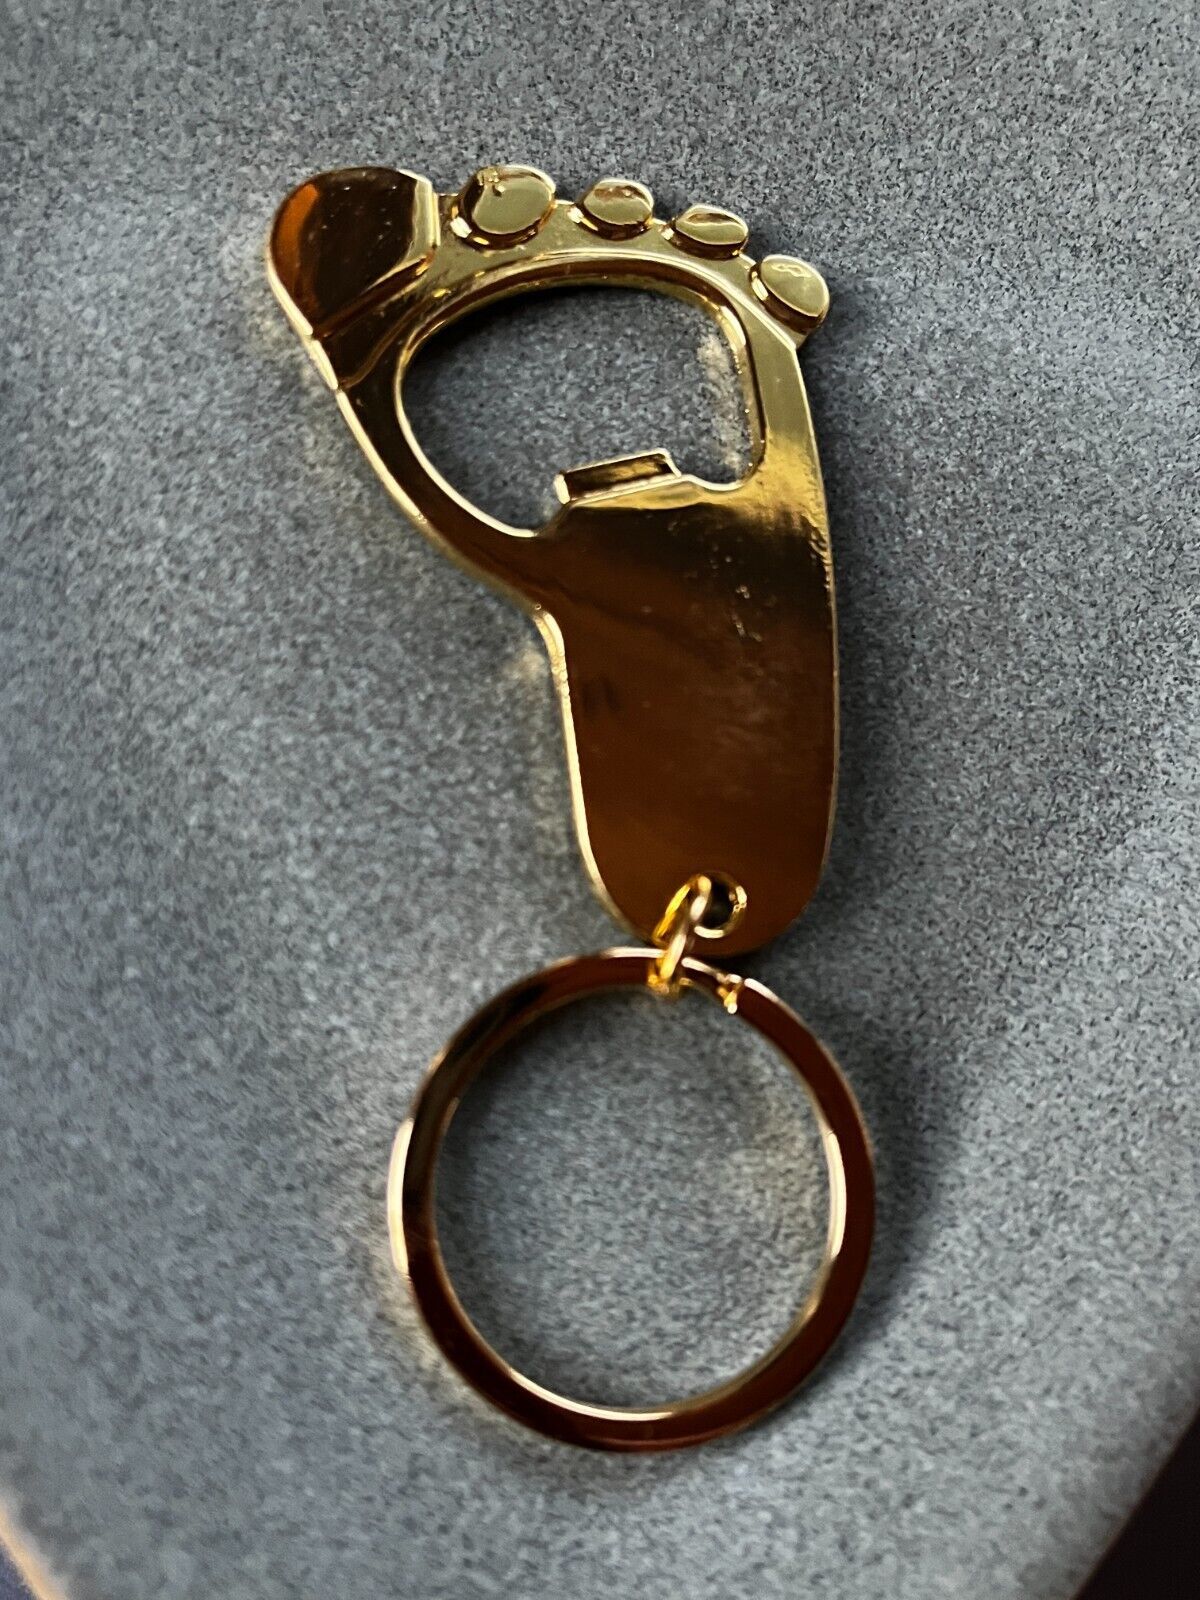 Primary image for Goldtone Foot Bottle Opener Key Chain – 2.25 x 1.5 inches not including ring –